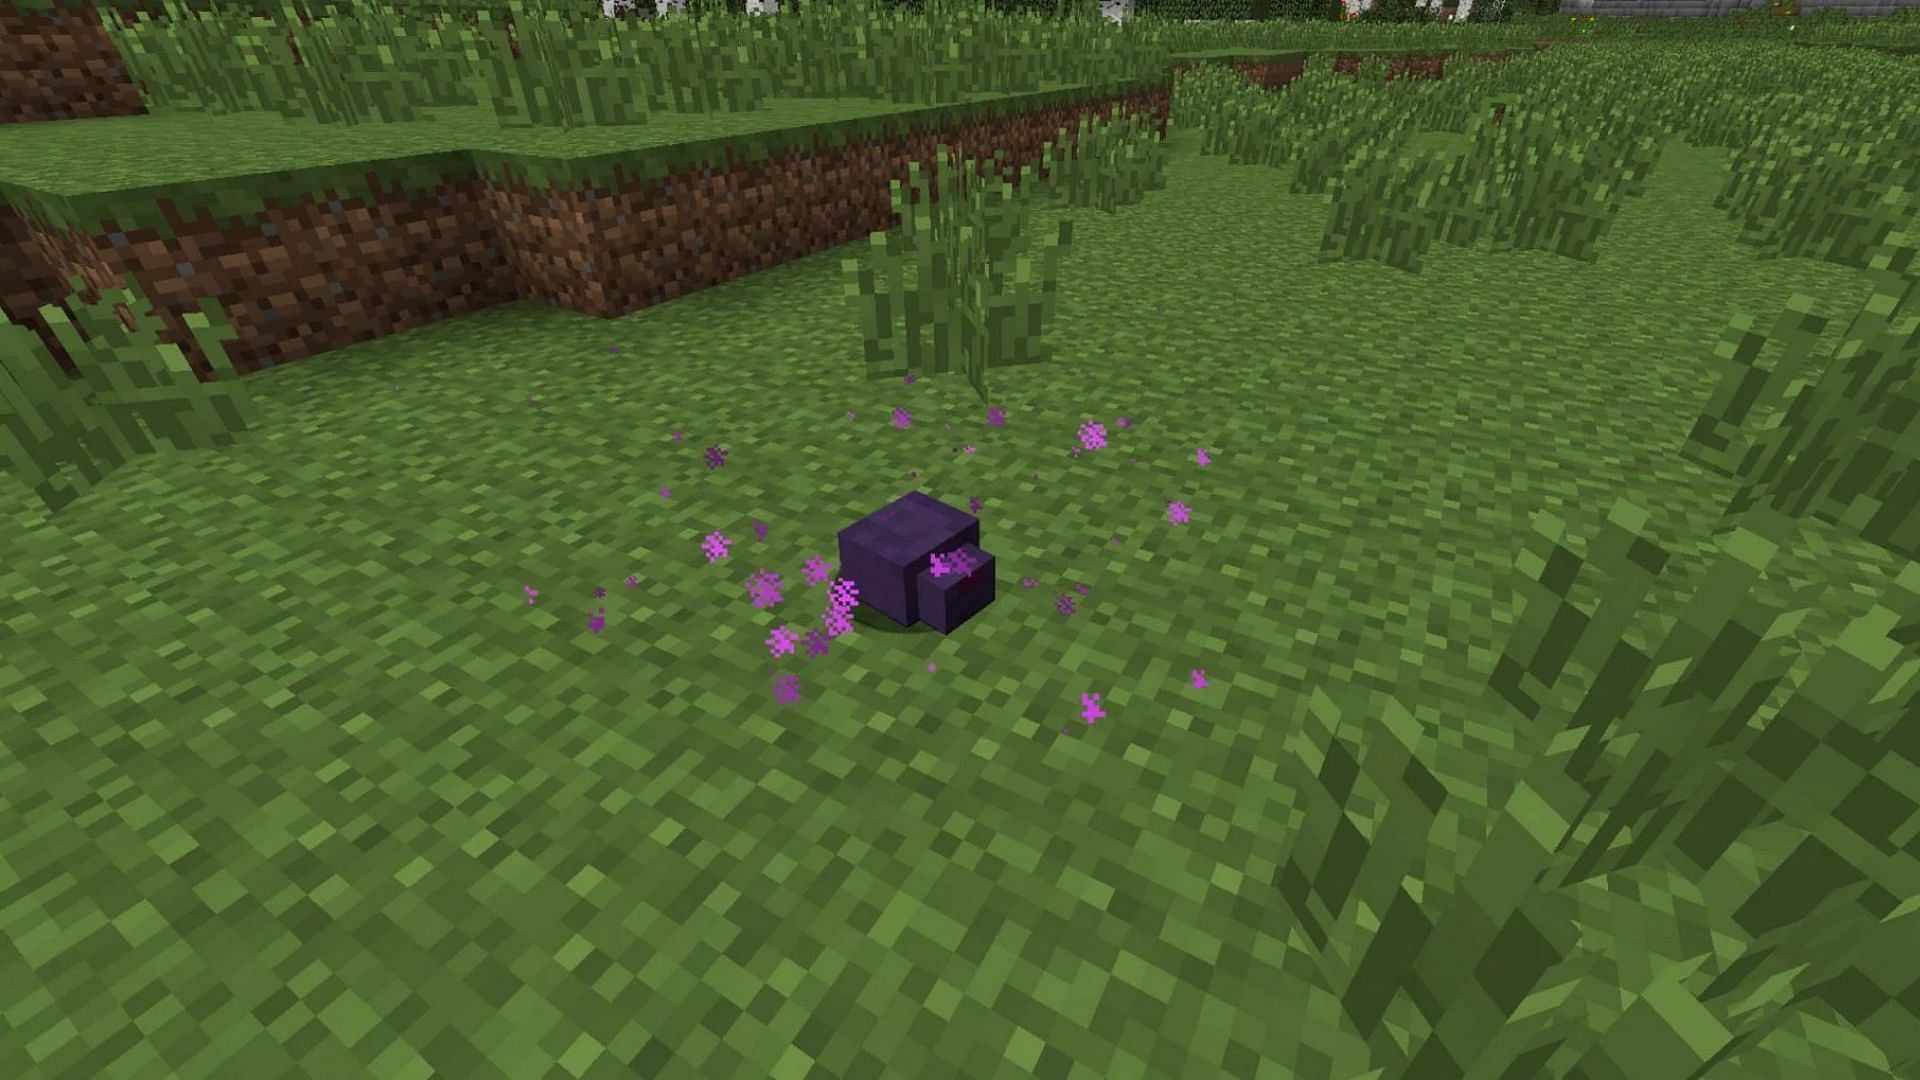 Endermite rarely spawn from a thrown ender pearl in Minecraft 1.19 (Image via Mojang)